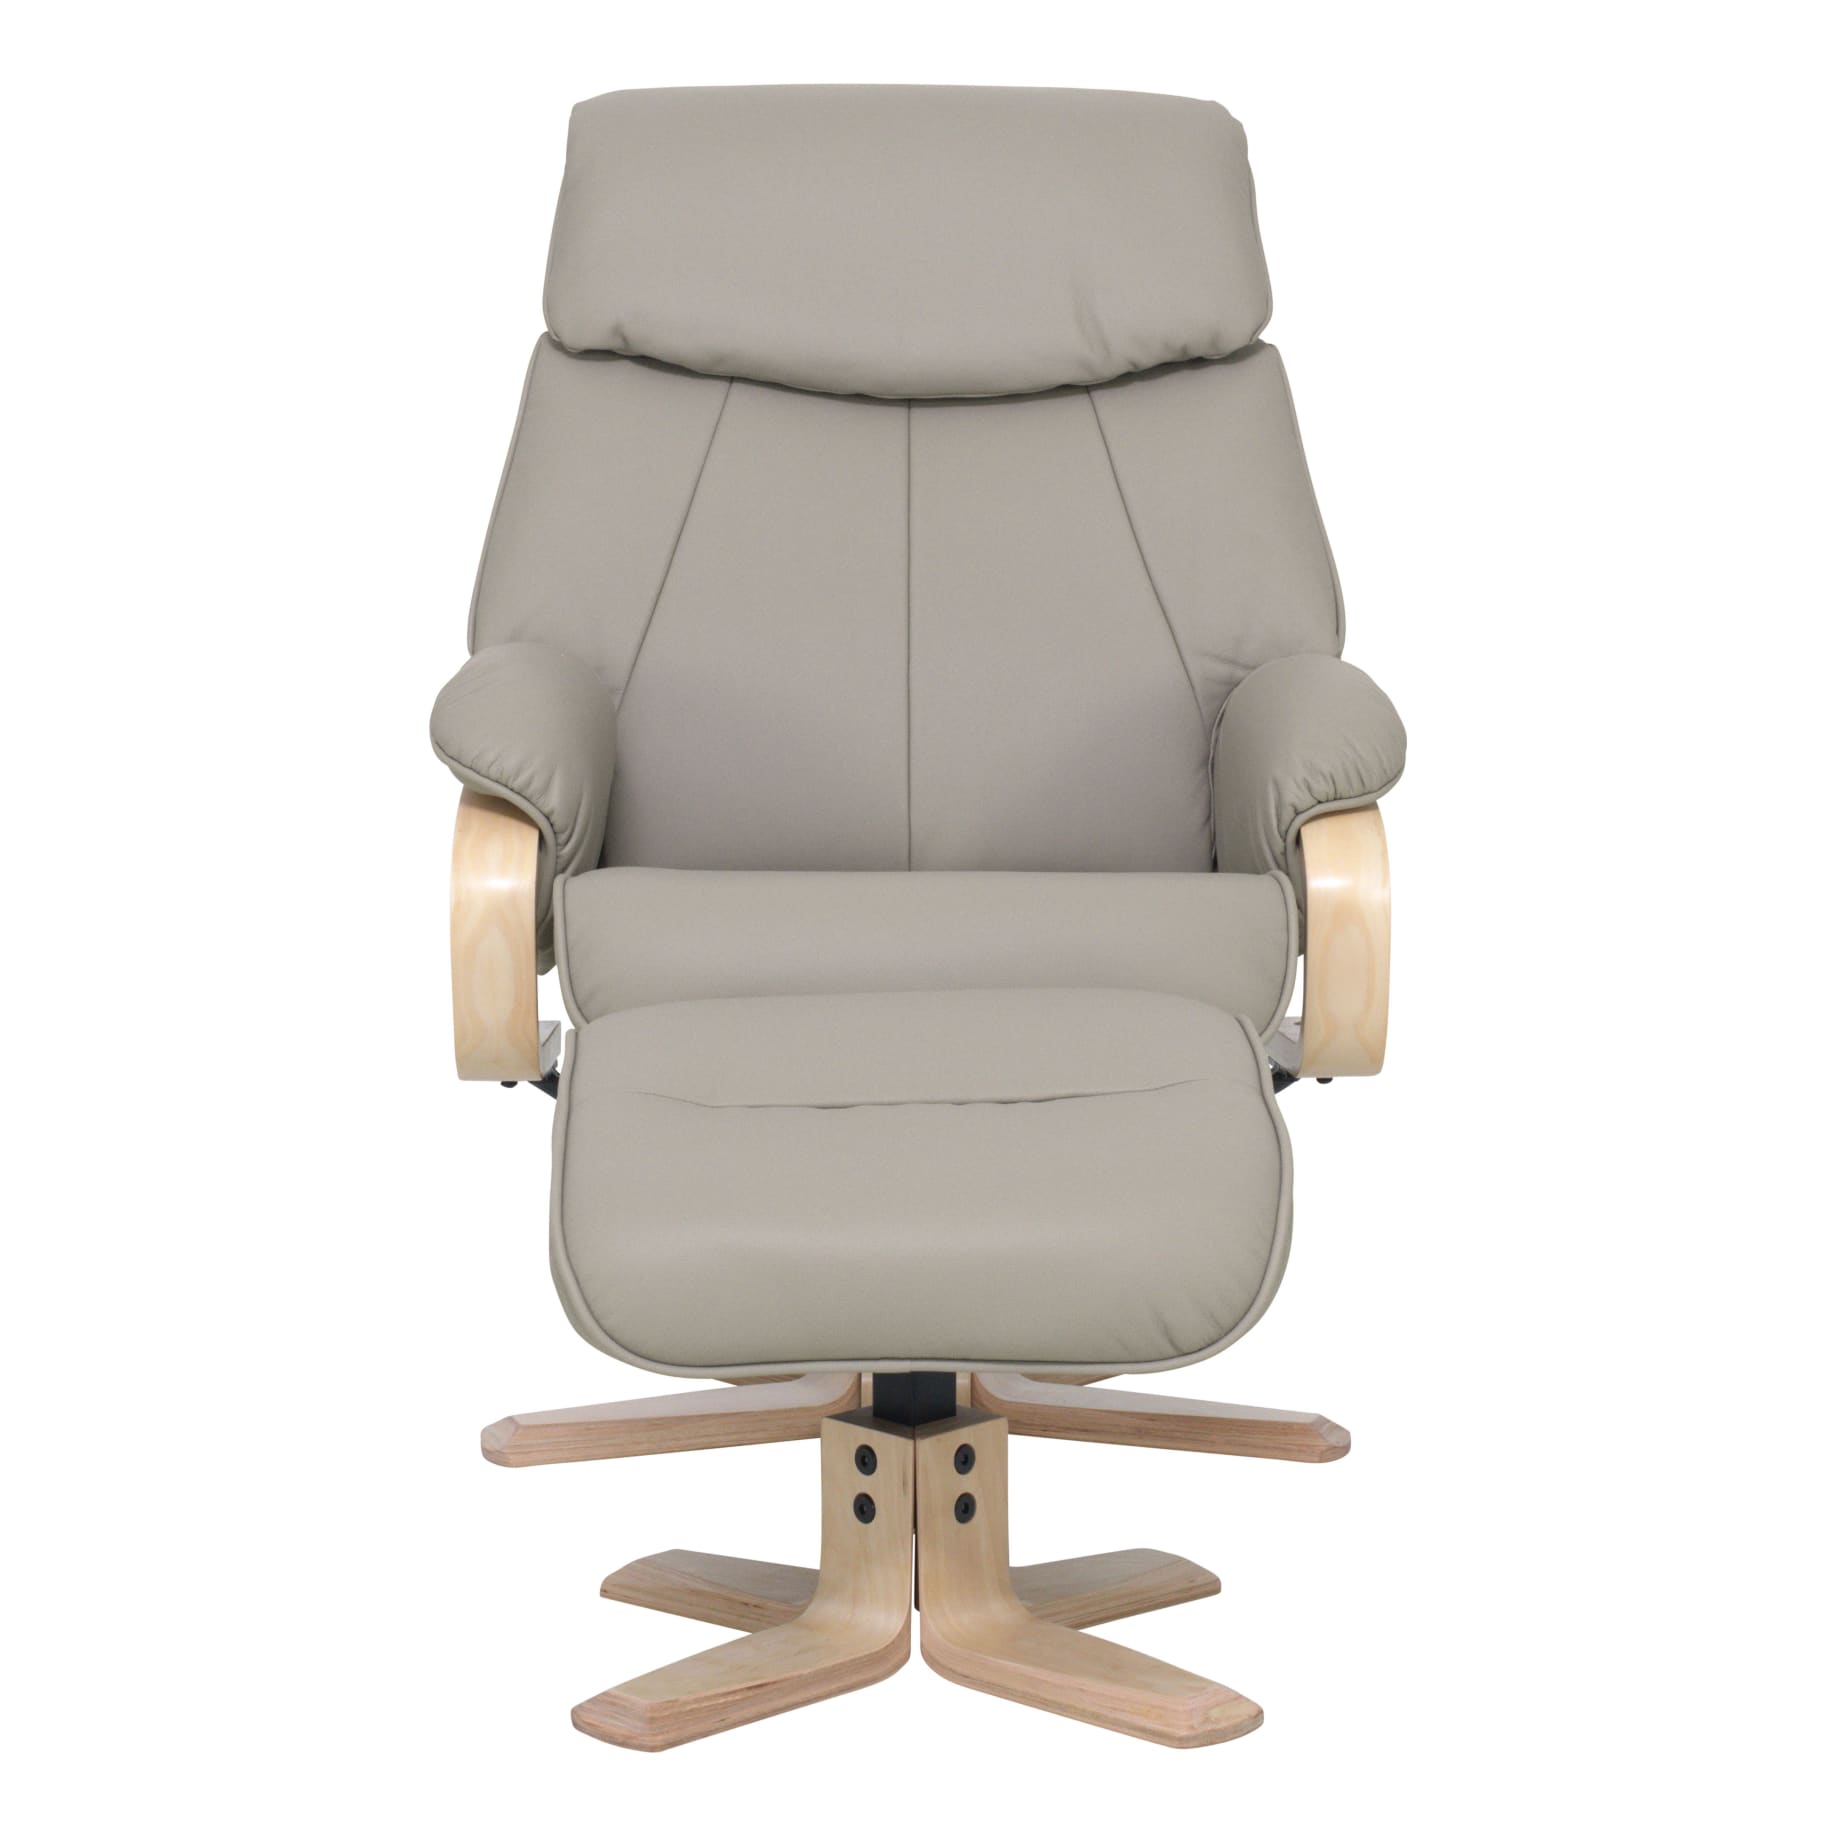 Turner Recliner Chair + Ottoman in Almond / Natural Leg